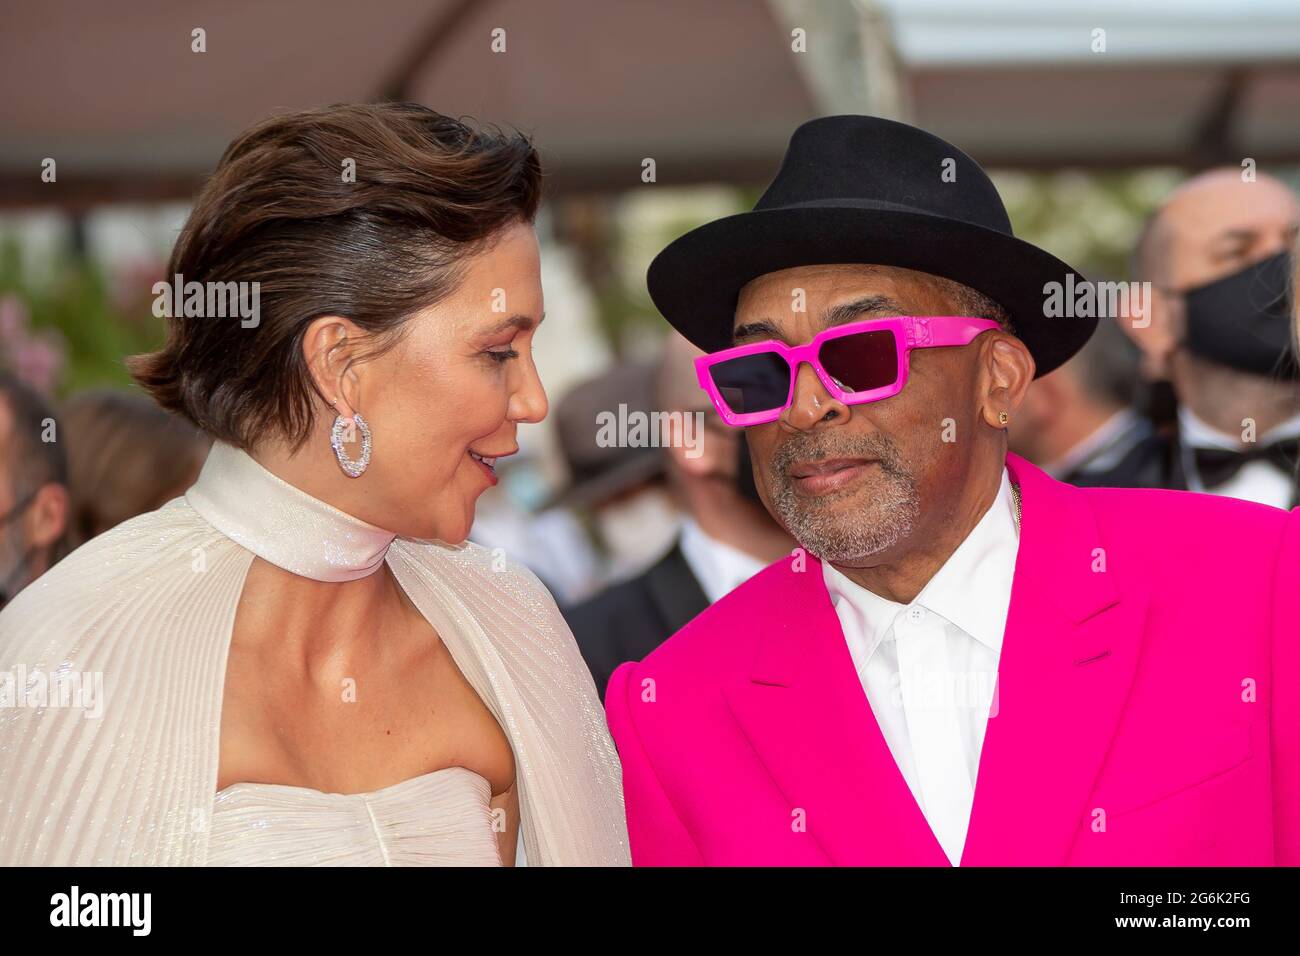 Cannes, France. 06th July, 2021. jury president Spike Lee and jury member Maggie Gyllenhaal and Song Kang-ho attend the 'Annette' screening and opening ceremony during the 74th annual Cannes Film Festival on July 06, 2021 in Cannes, France. Photo: Franck Boham/imageSPACE/MediaPunch. Credit: MediaPunch Inc/Alamy Live News Stock Photo